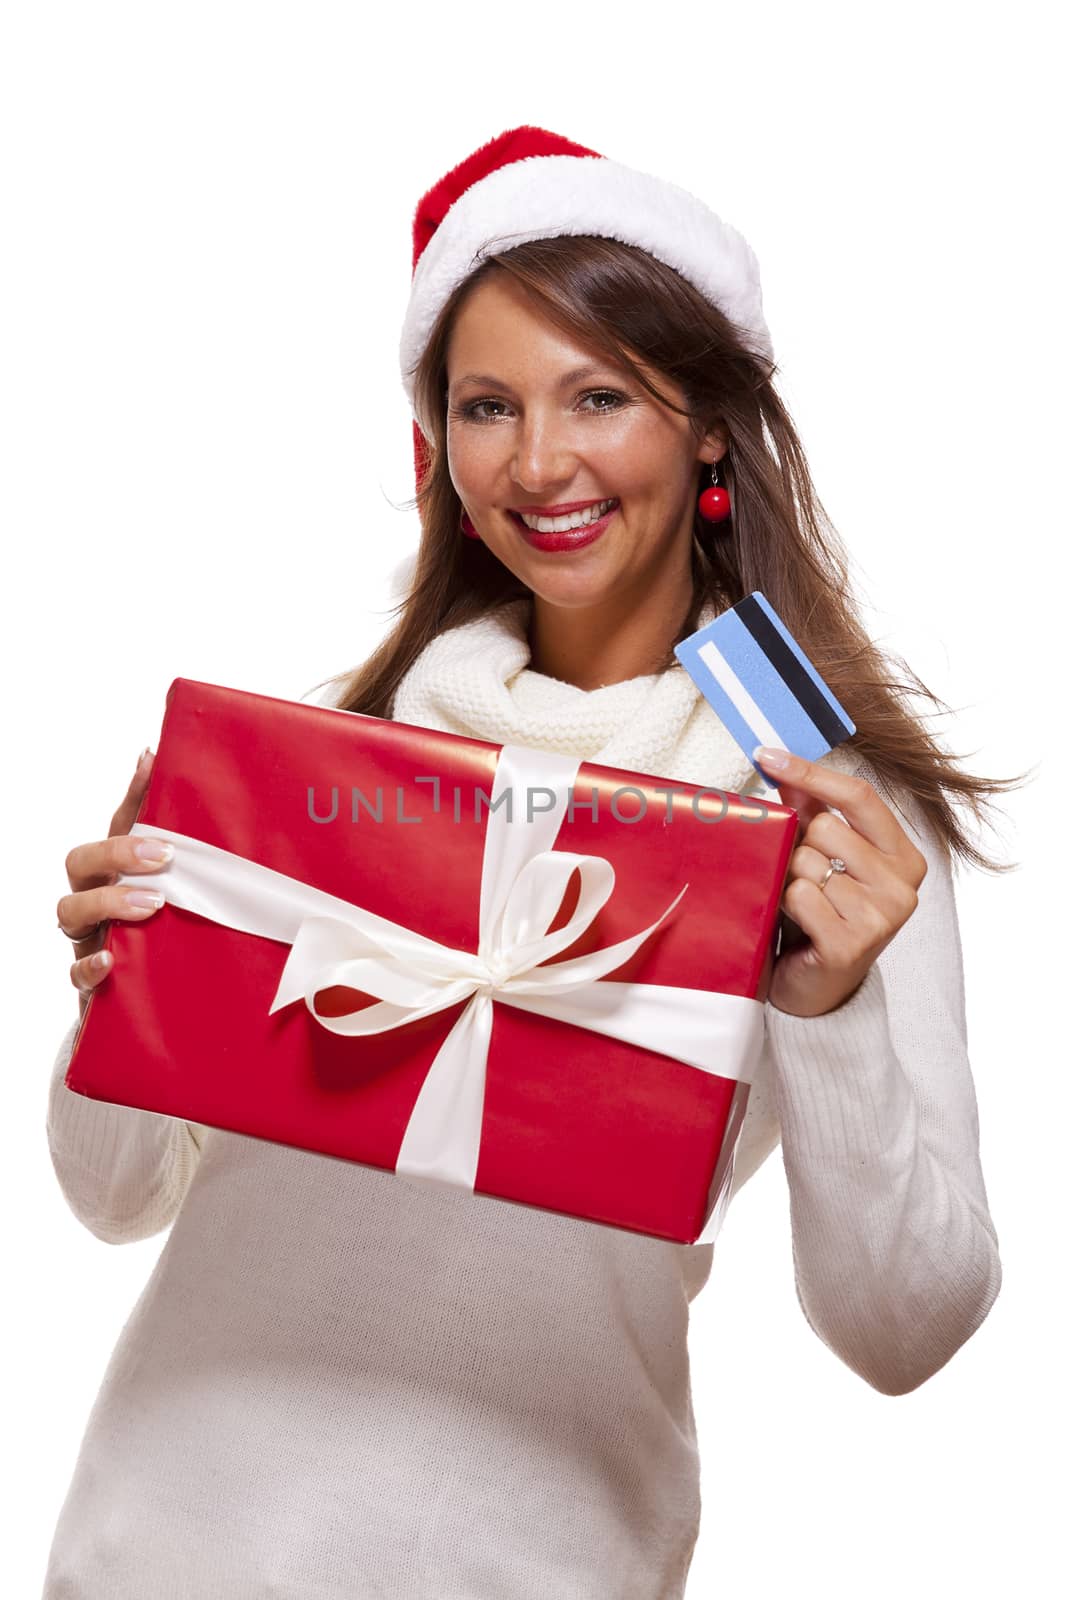 Attractive woman with a lovely smile wearing a red Santa hat holding a big red Christmas gift box and bank card as she celebrates her successful shopping spree